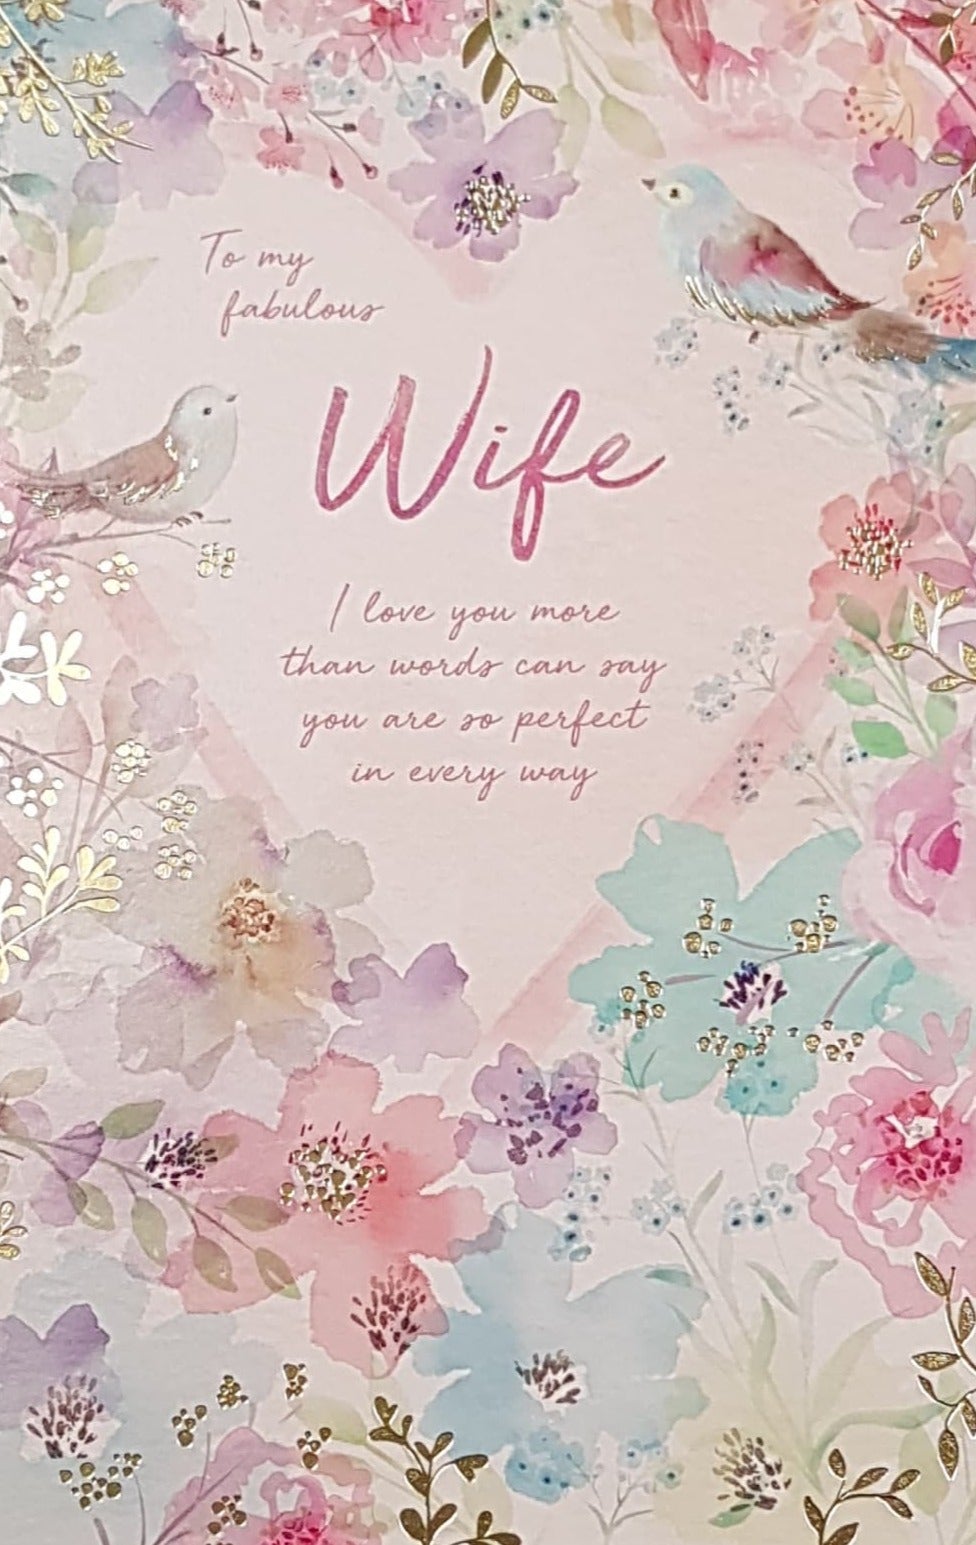 Birthday Card - Wife / A Colourful Floral Motif Forming A Heart With Birds